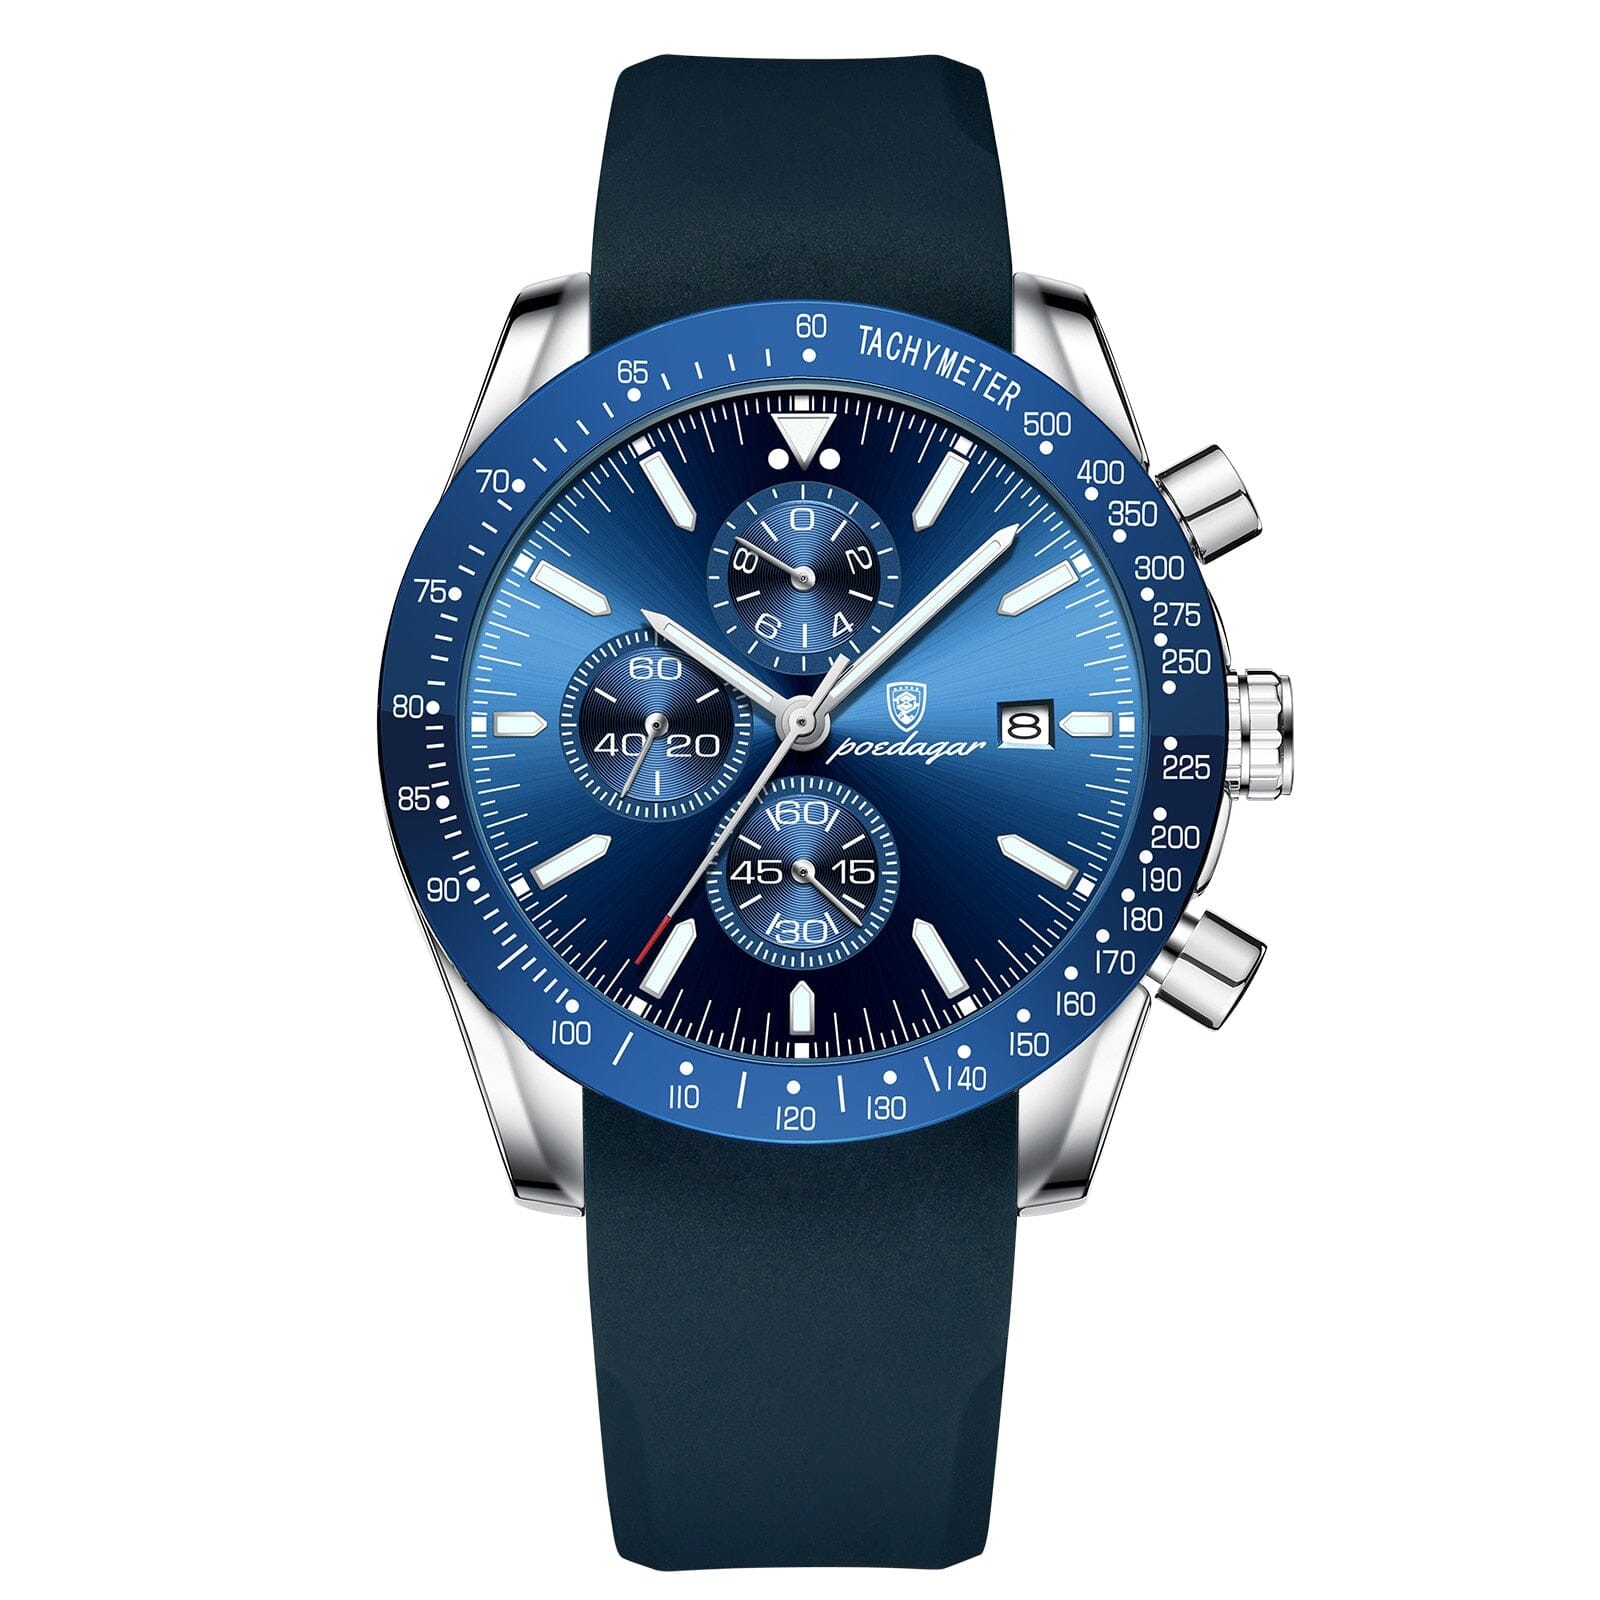 POEDAGAR Luxury Casual Sport Watch - Stay Fashionably on Time with Ease! - Water Resistant, Durable and Chic Mechanical Watches PikNik Silver Blue Silicone 